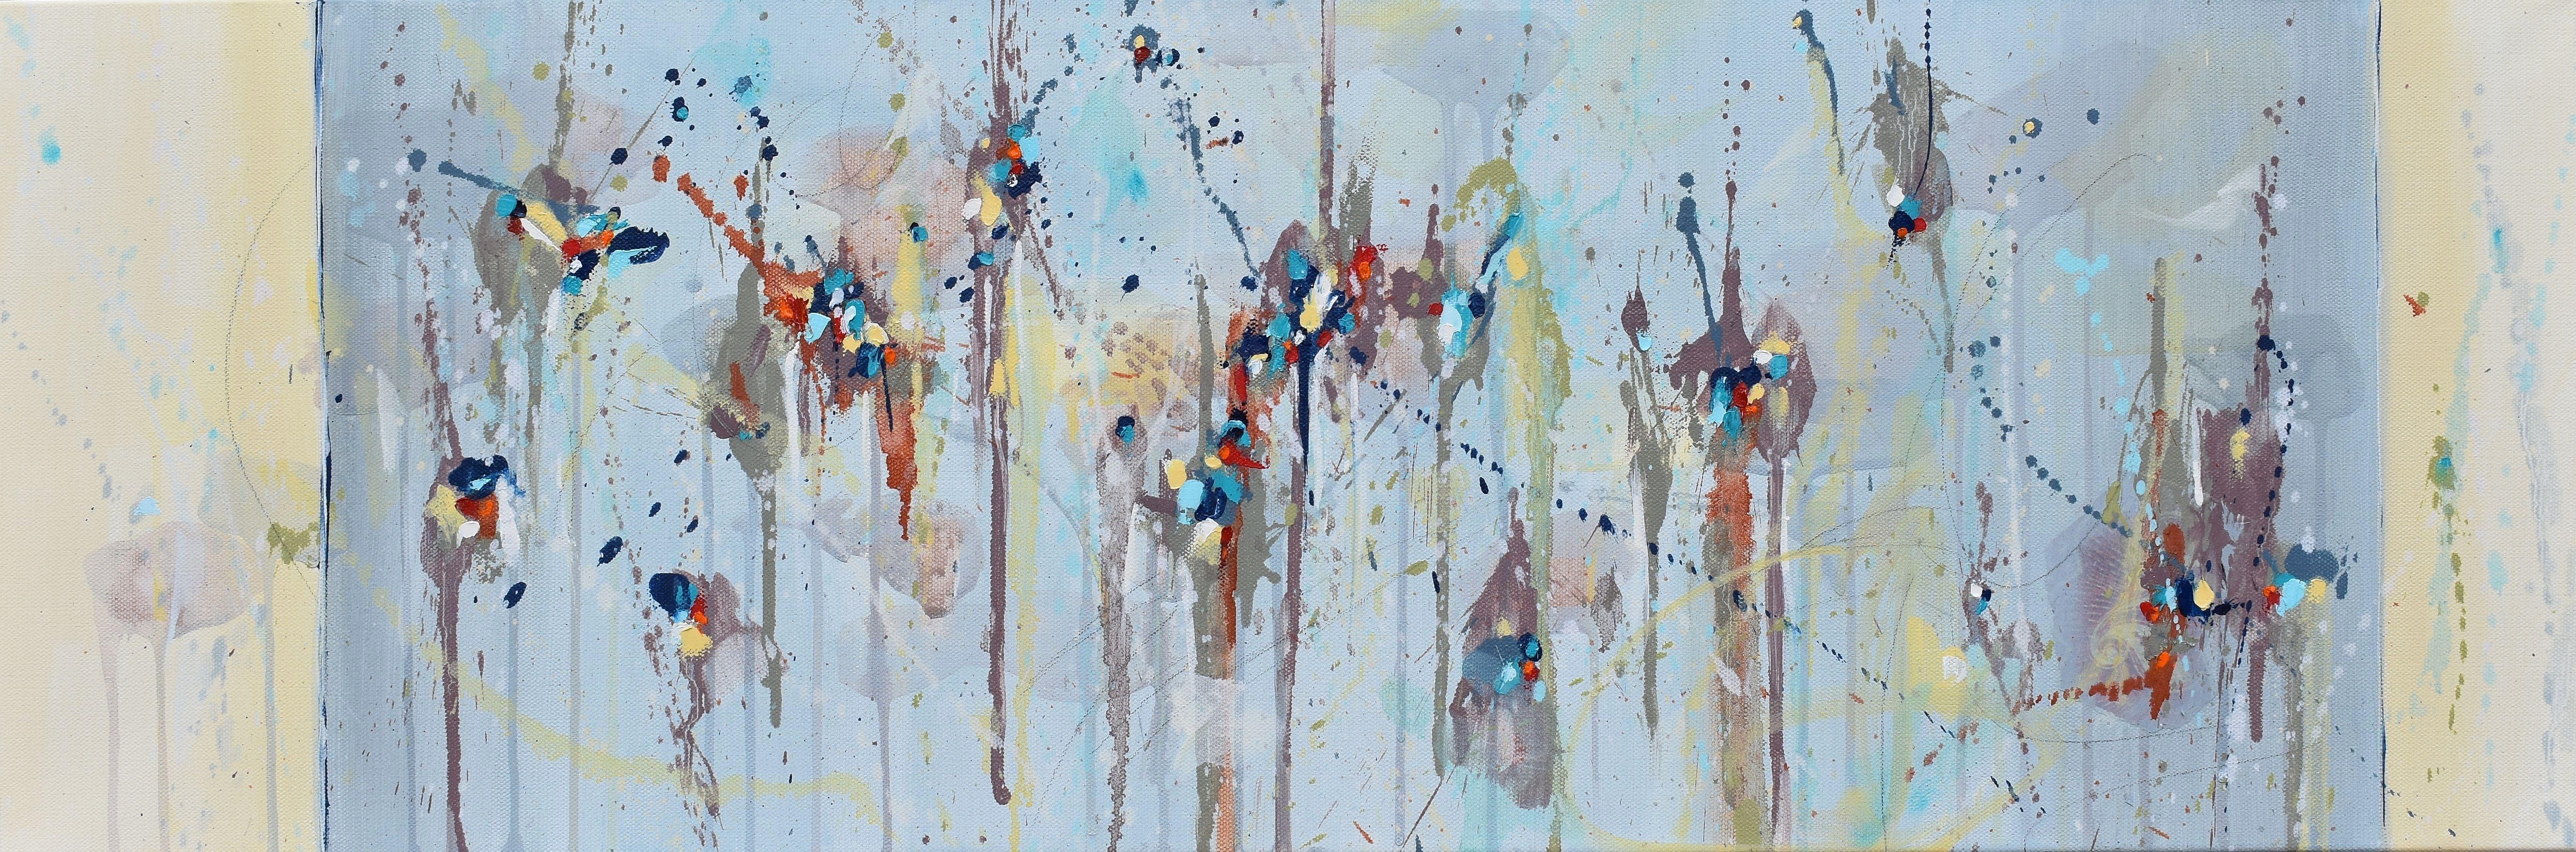 Cynthia Ligeros Abstract Painting - Journey of Wonder, Abstract Oil Painting